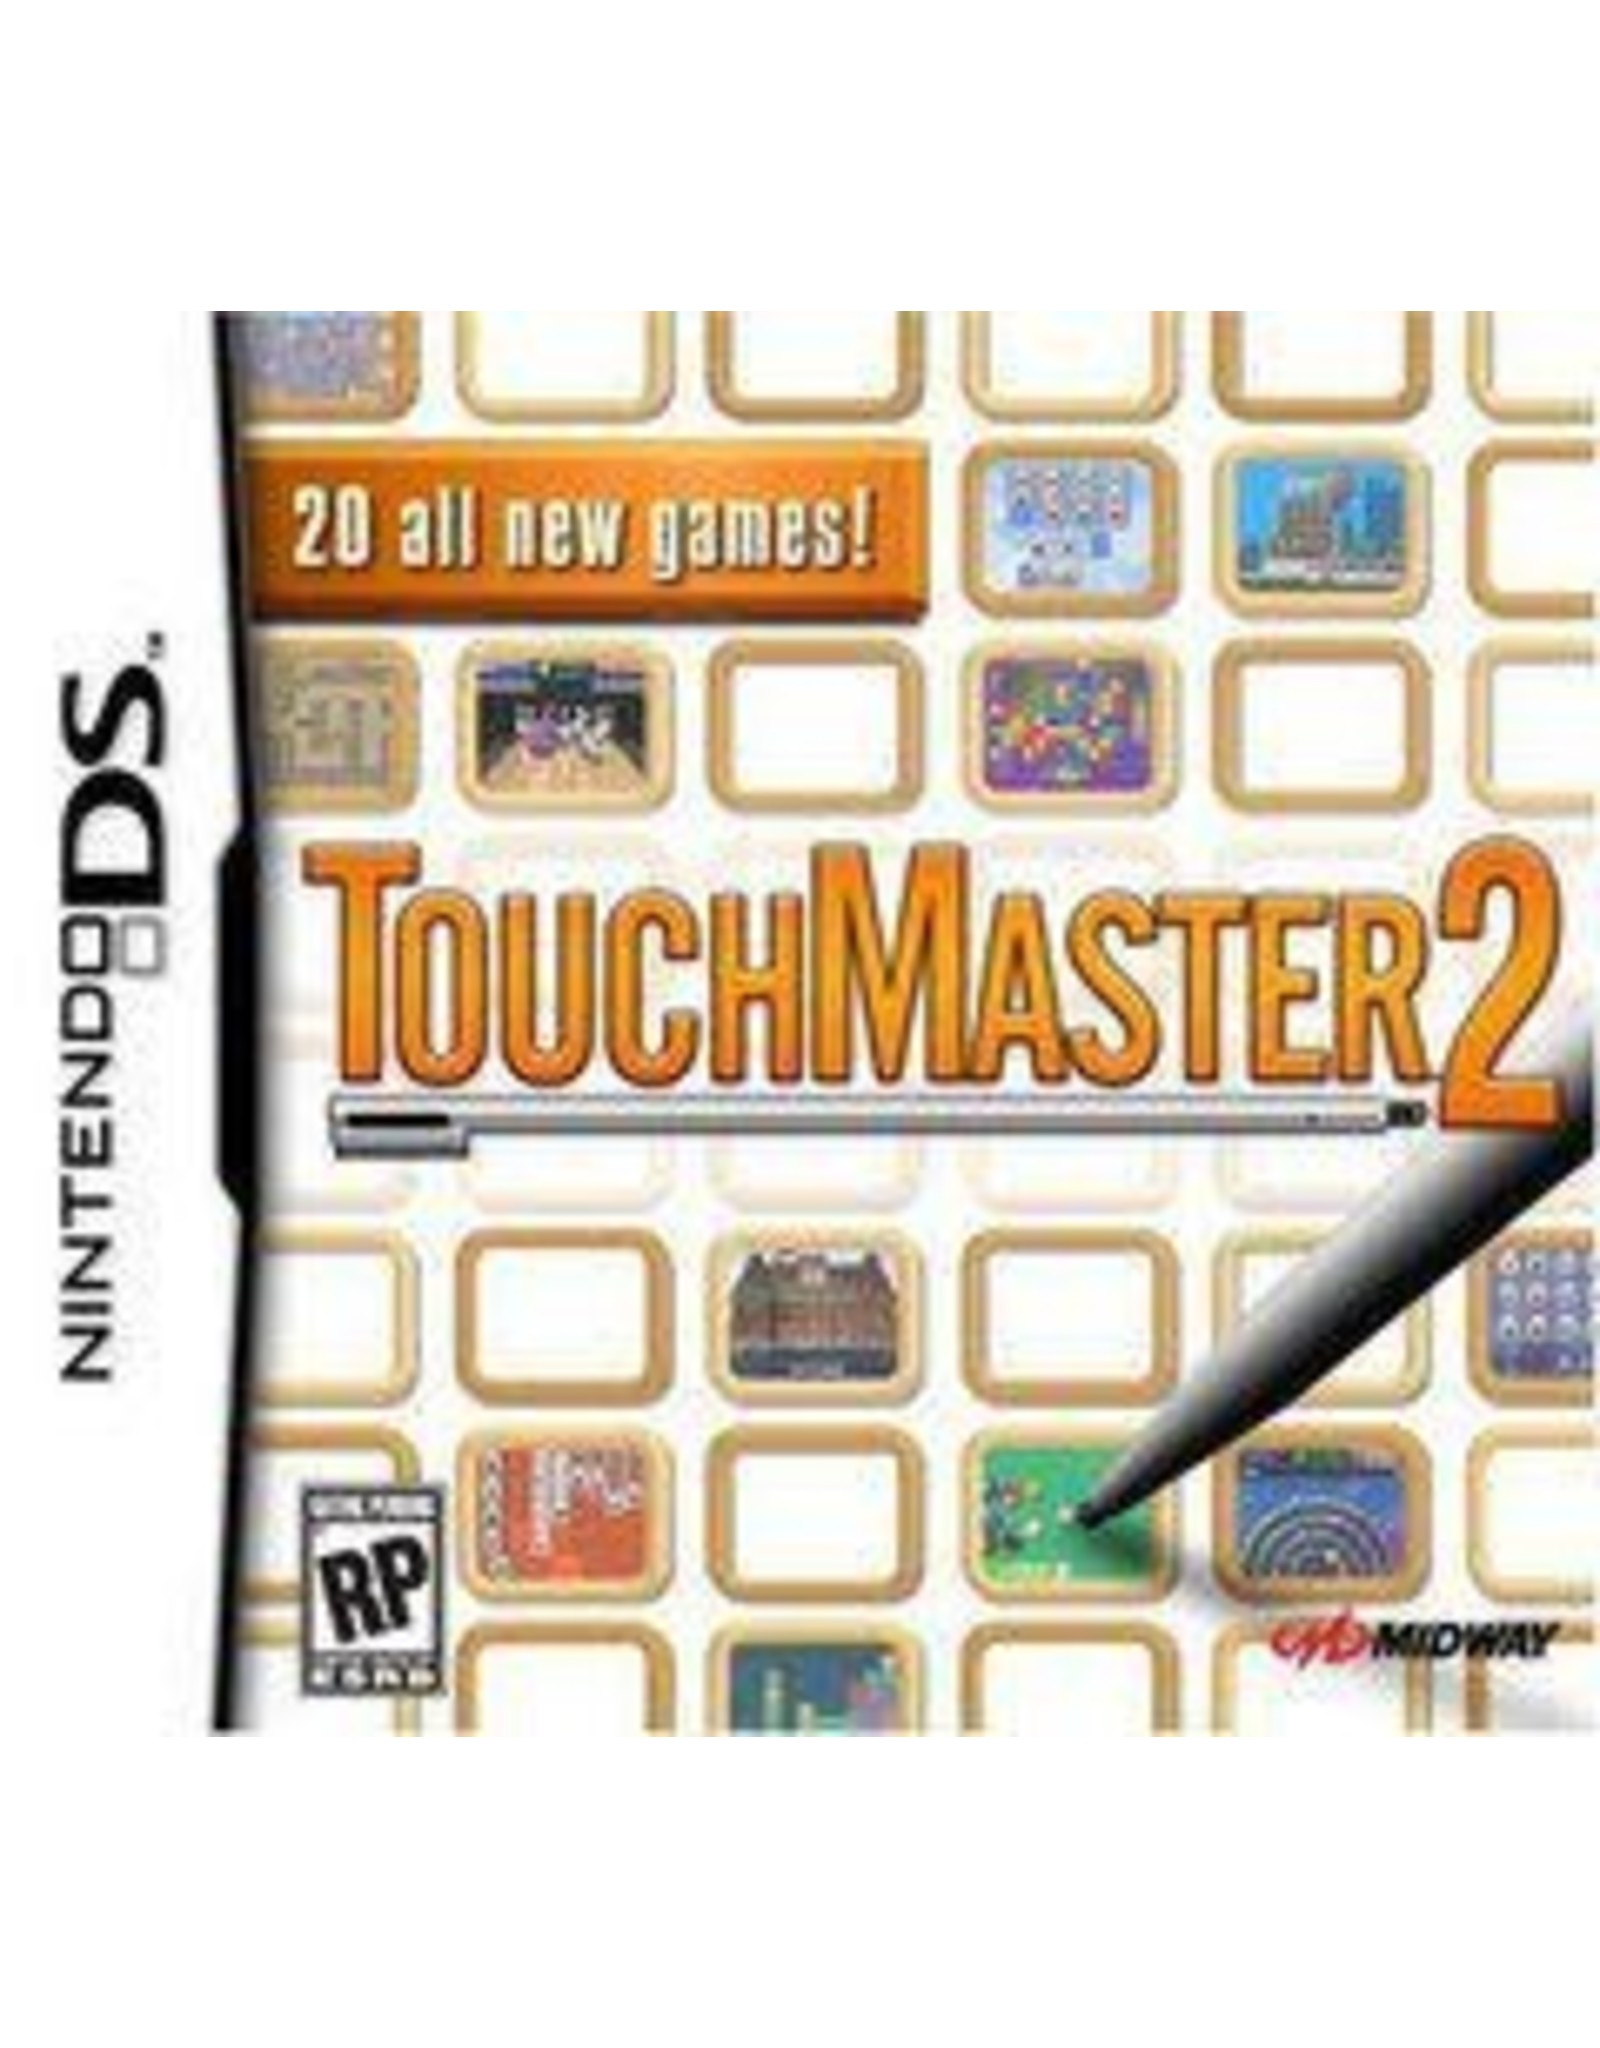 Nintendo DS Touchmaster 2 (Cart Only)